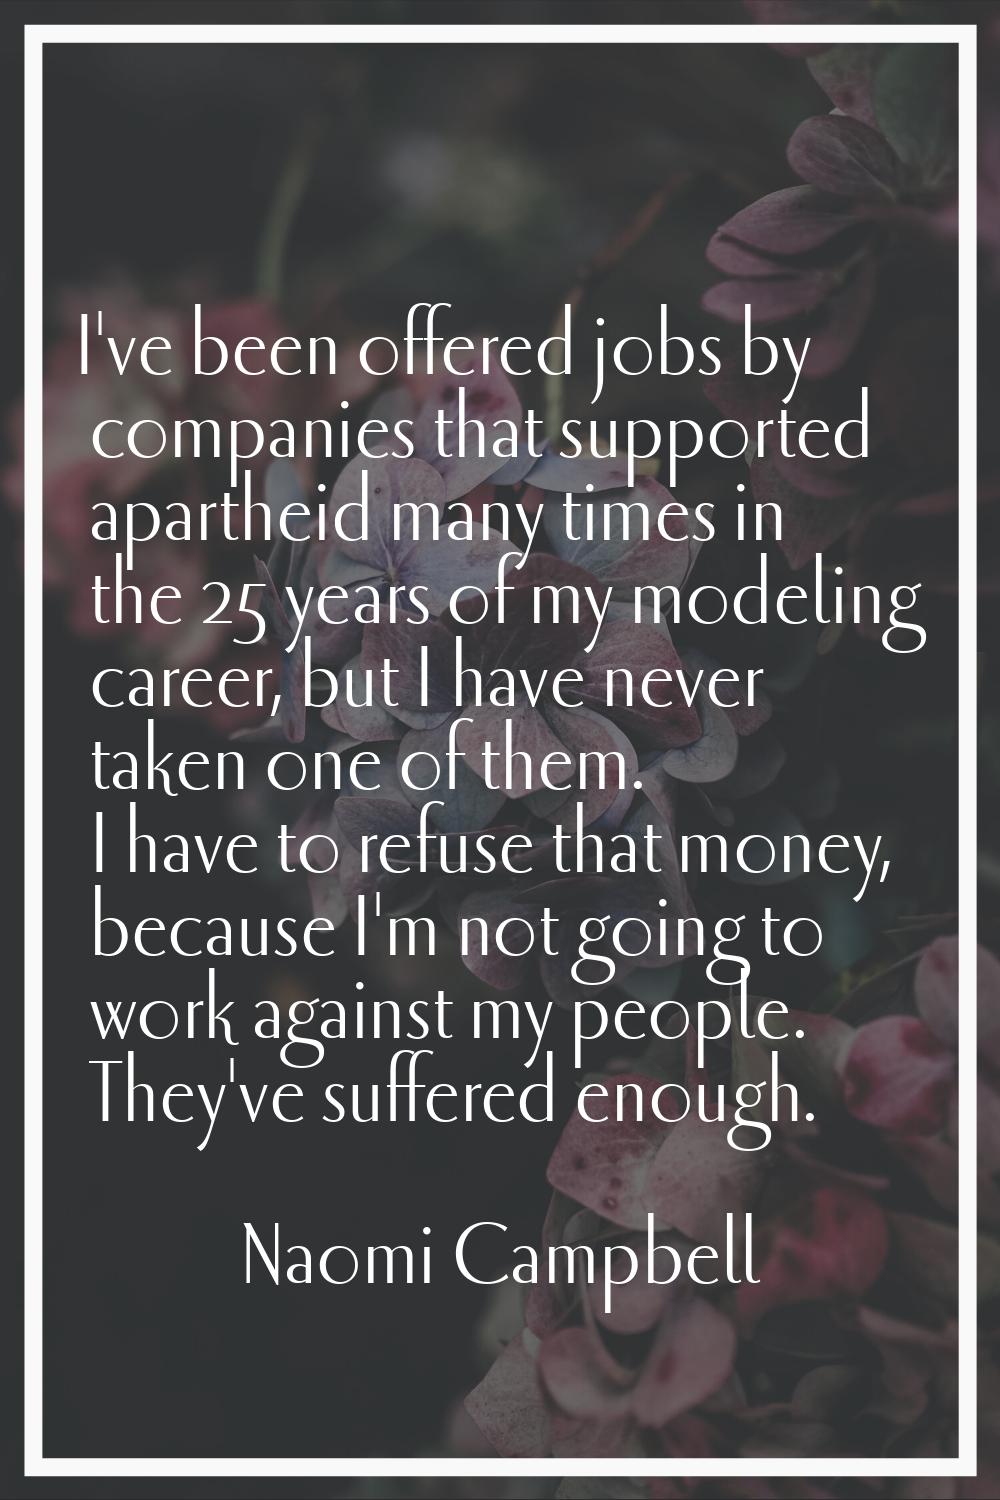 I've been offered jobs by companies that supported apartheid many times in the 25 years of my model